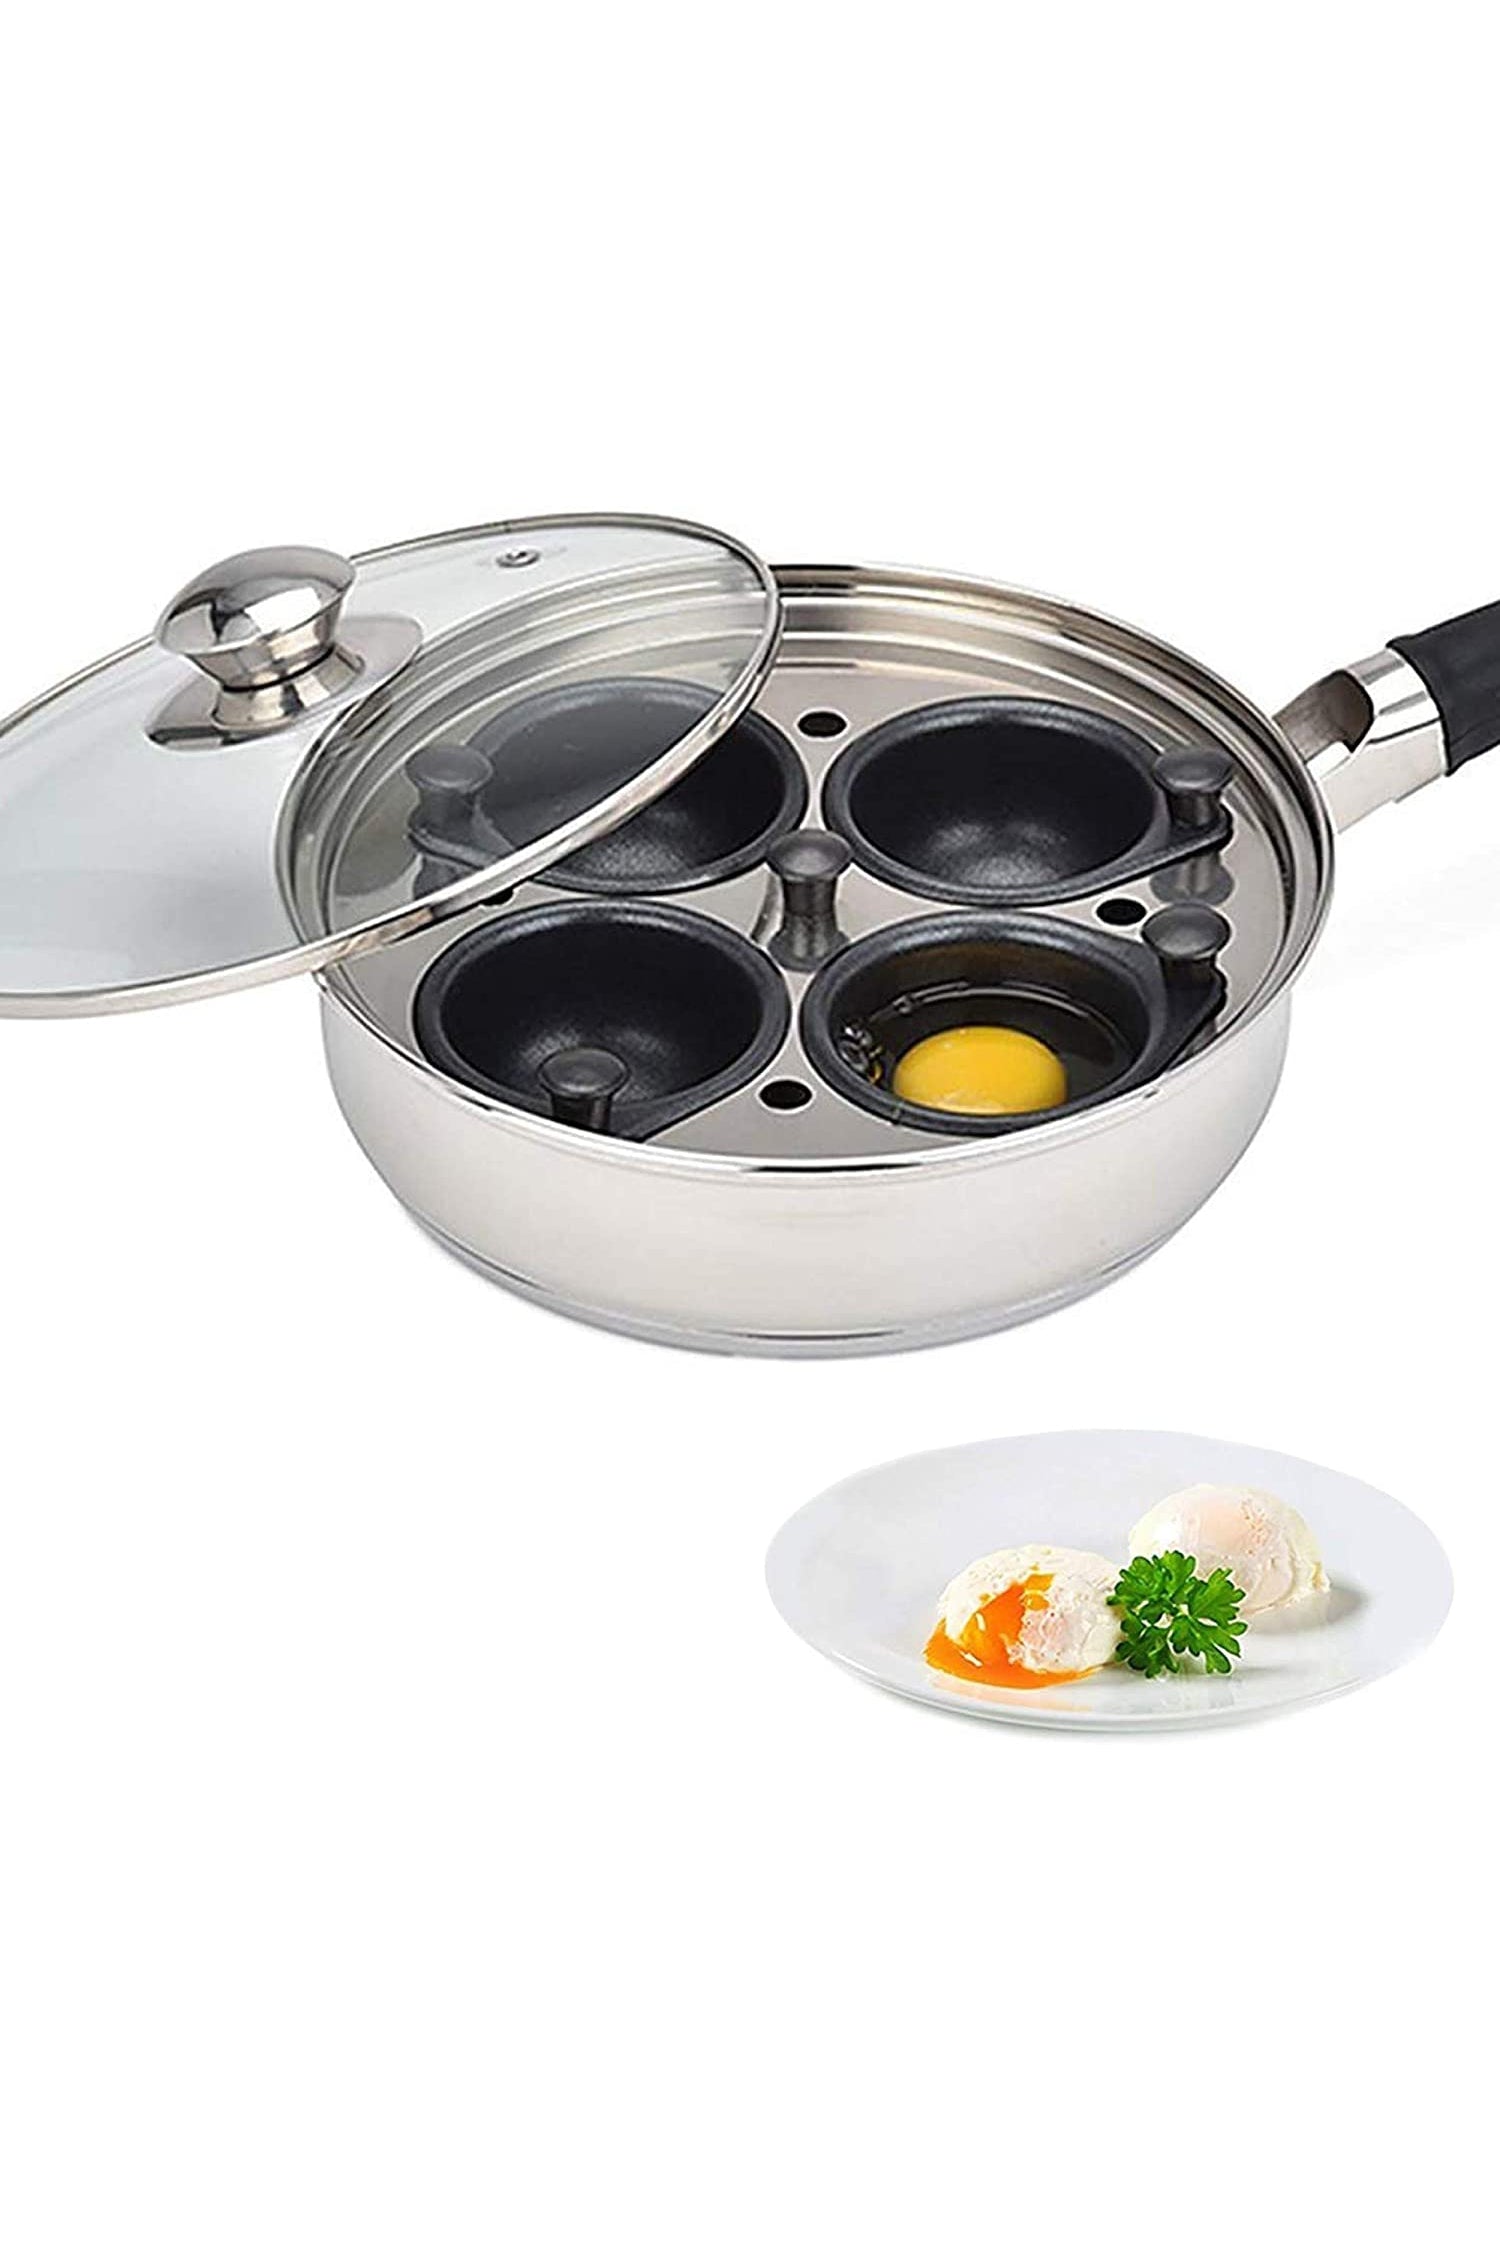 Modern Innovations Stainless Steel Egg Poacher Pan Set with 4 Nonstick –  Stock Your Home